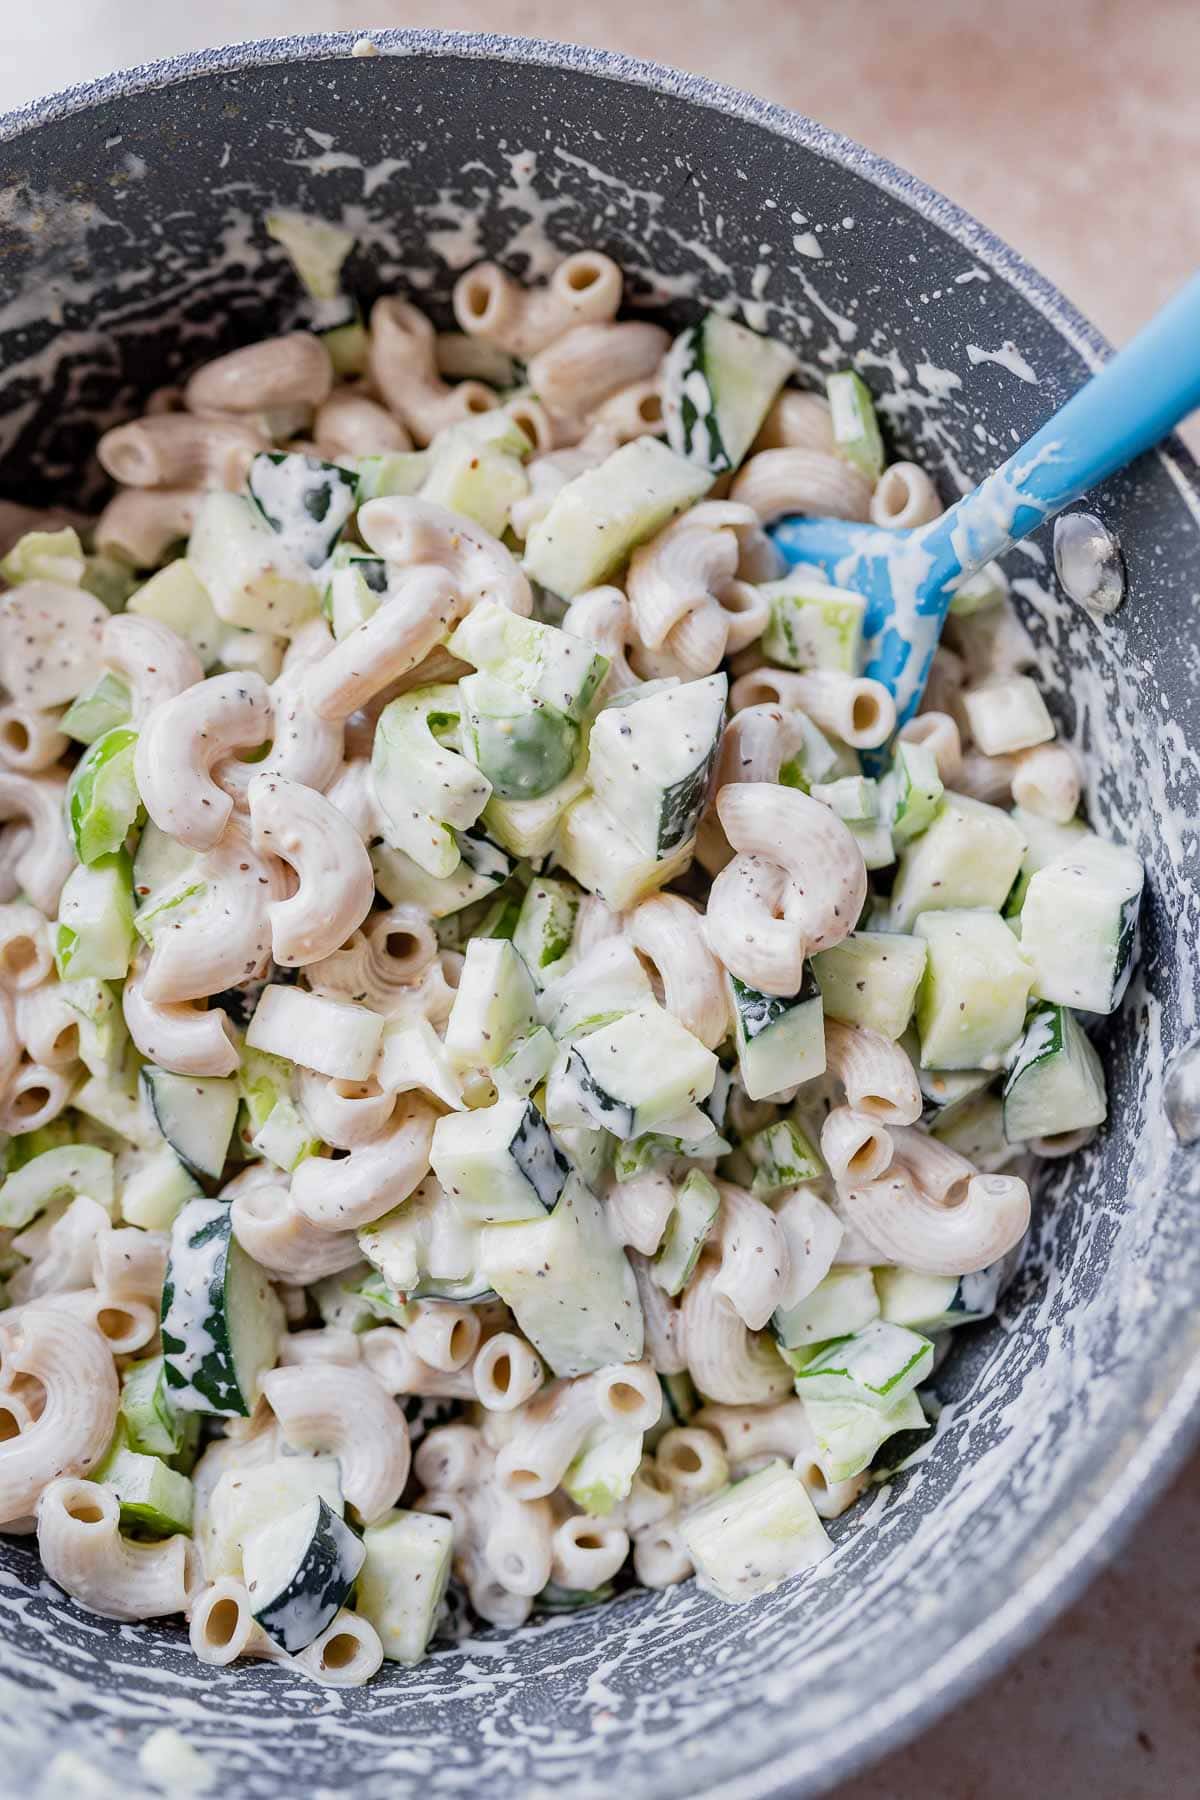 Gluten-free macaroni salad in a large bowl with a blue spoon.